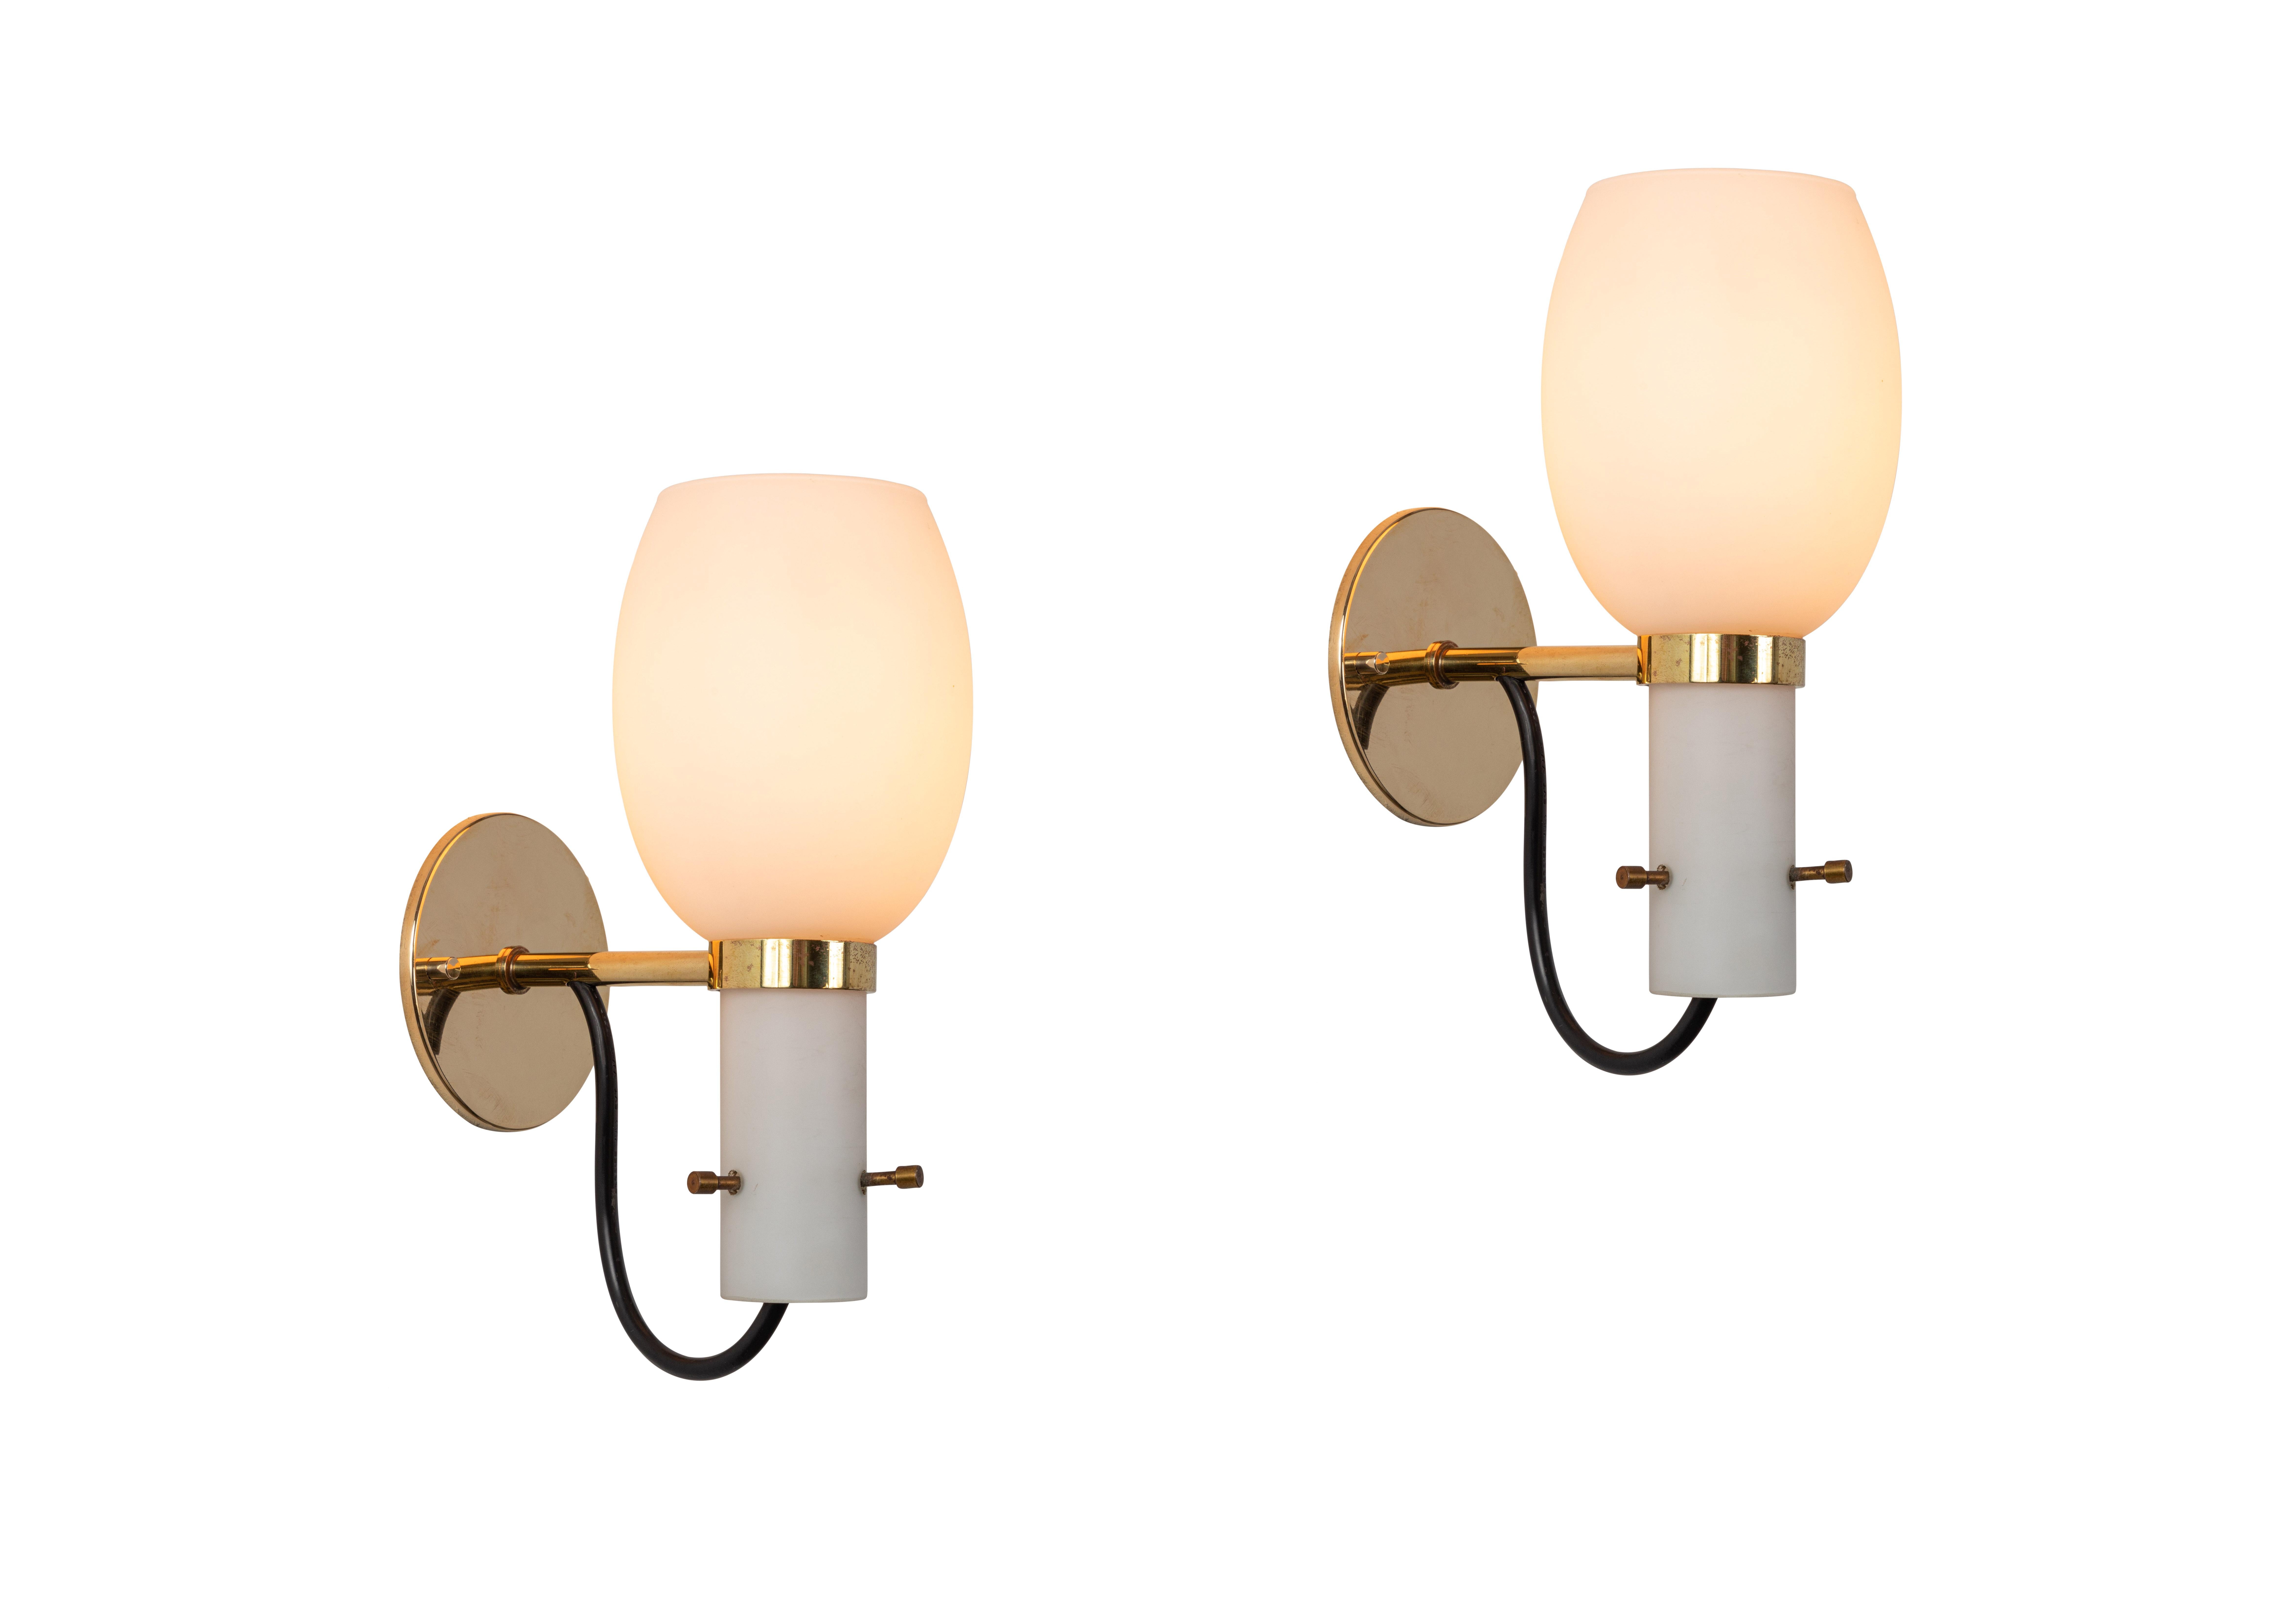 1950s Italian brass and glass sconces attributed to Stilnovo. Executed in polished brass and sculptural opaline glass, with custom brass backplate for mounting over a standard American J-box. Ingeniously held in place with 3 decorative and richly